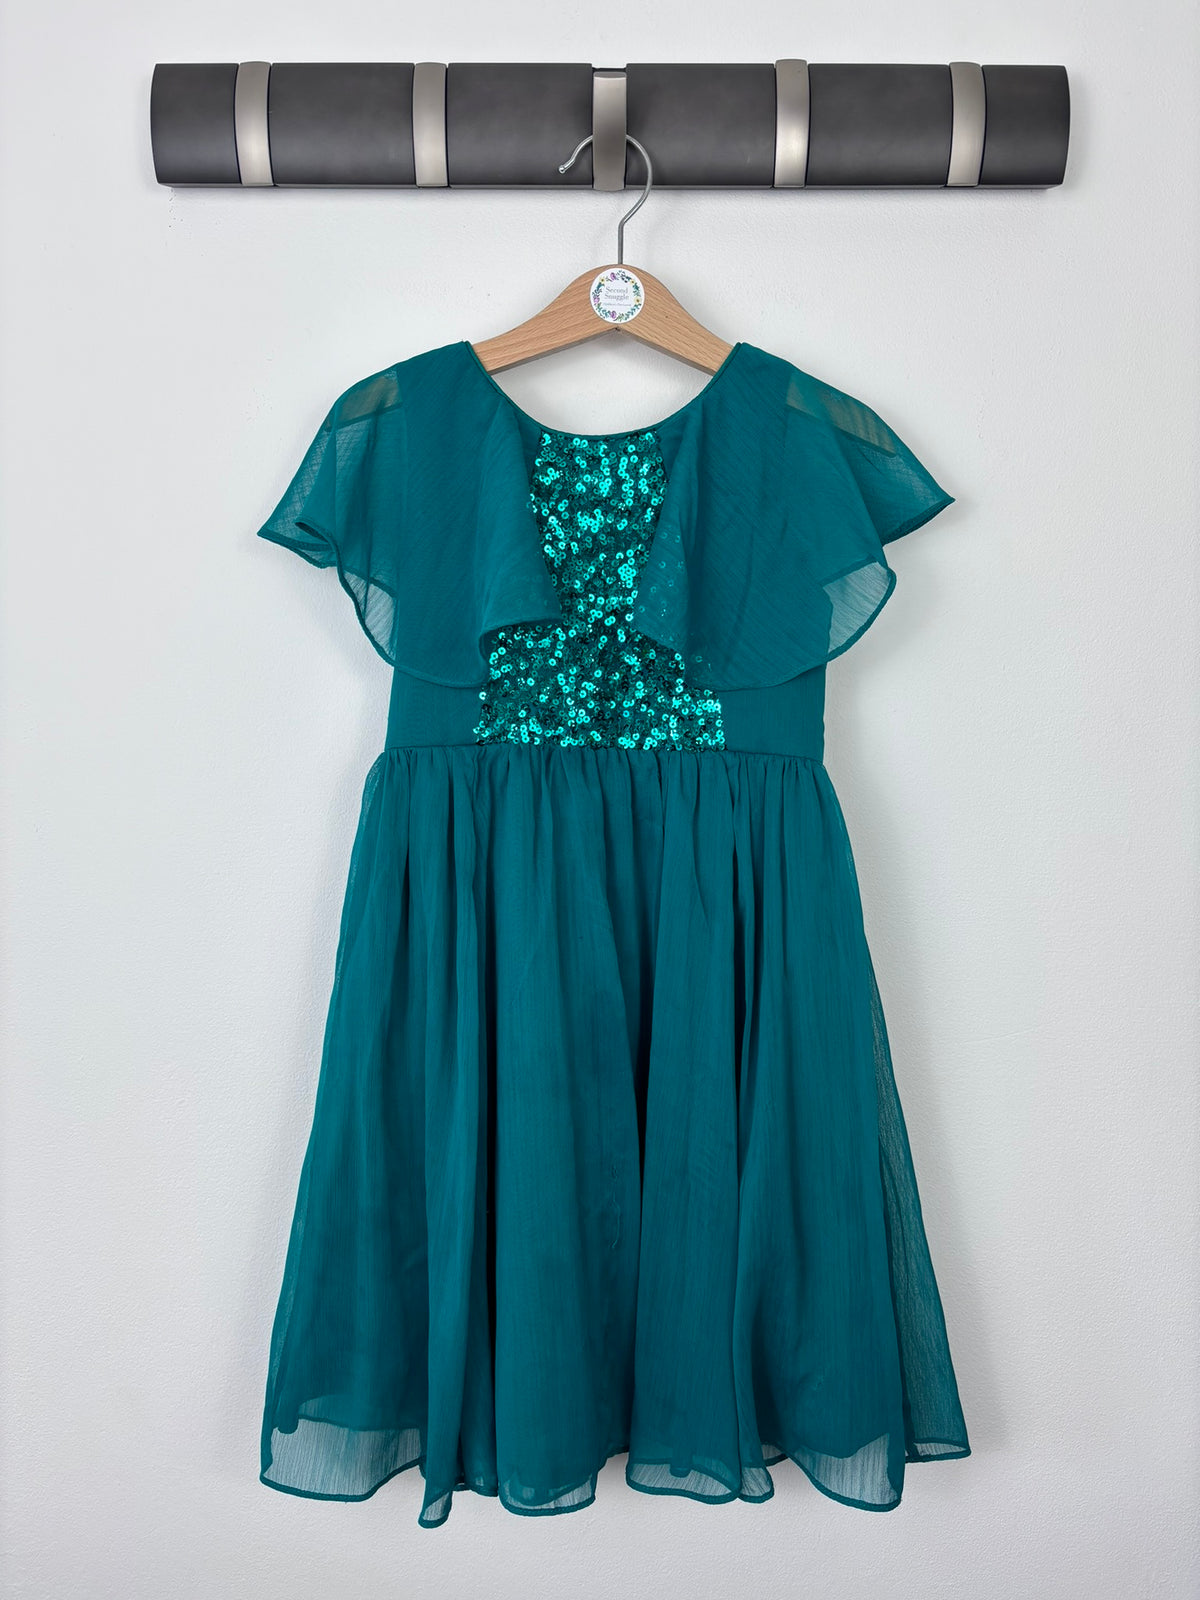 Monsoon 3 Years-Dresses-Second Snuggle Preloved